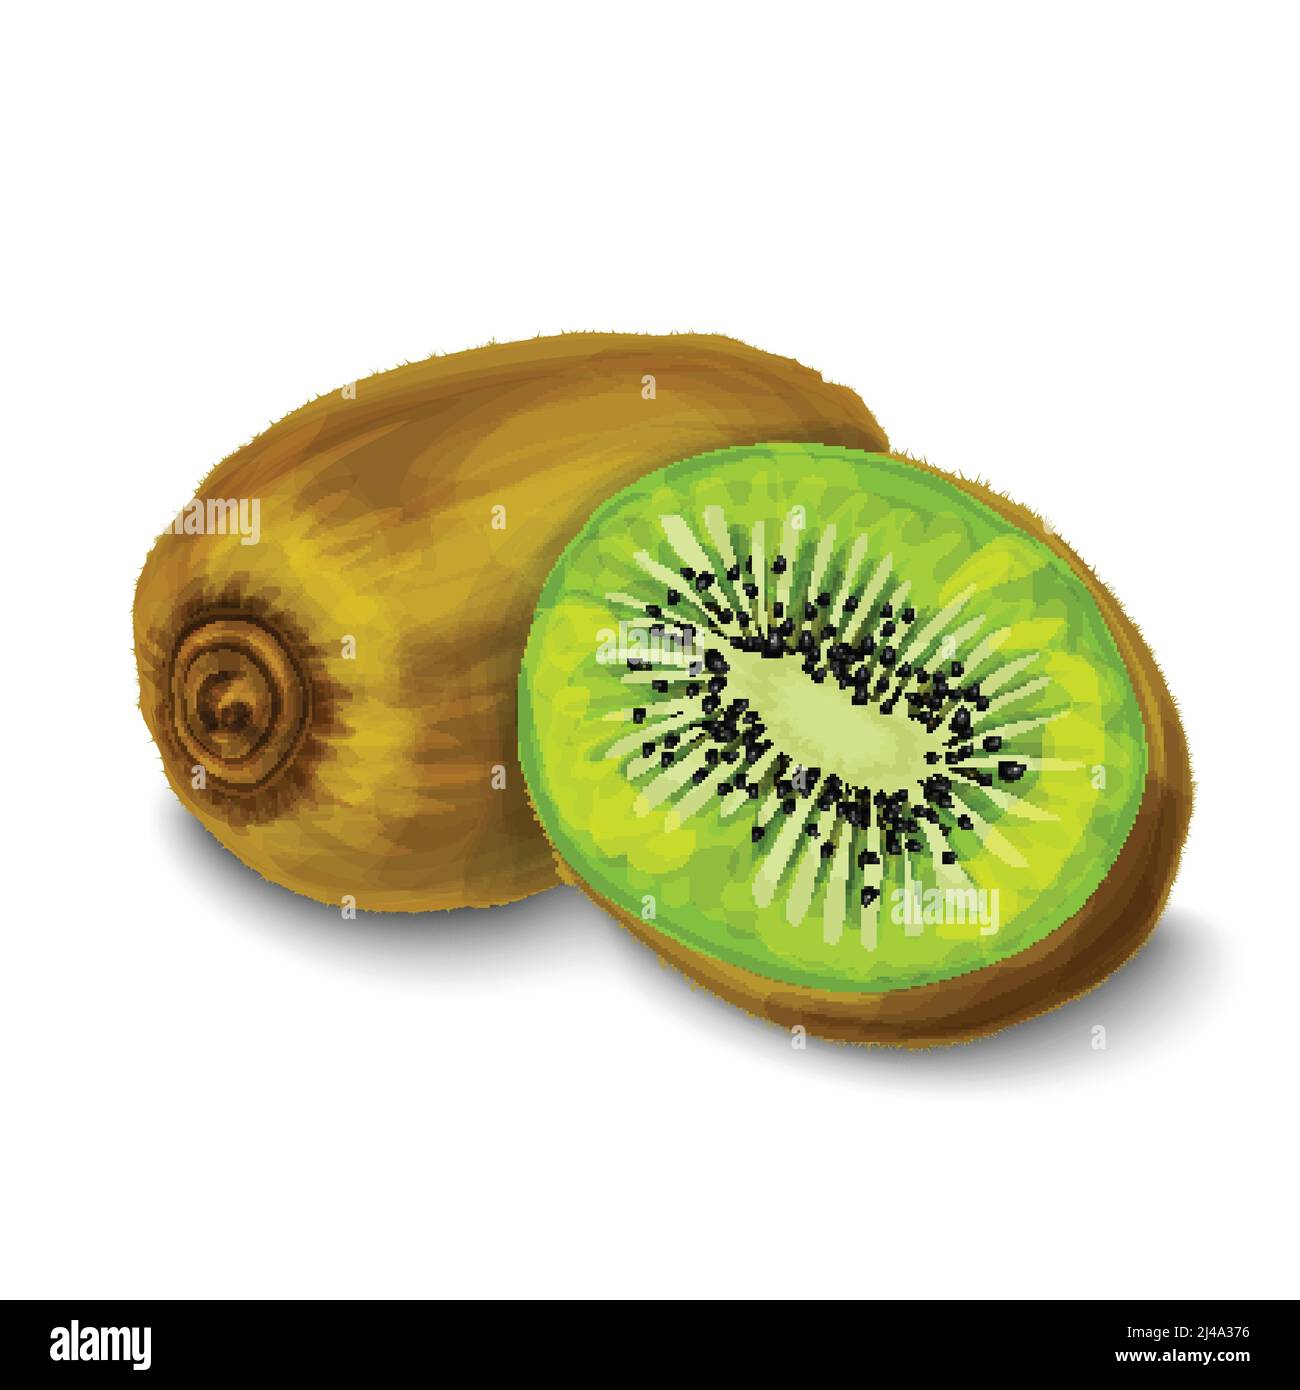 Natural organic sweet cut and sliced kiwi with pips tropical fruit decorative poster or emblem isolated vector illustration Stock Vector